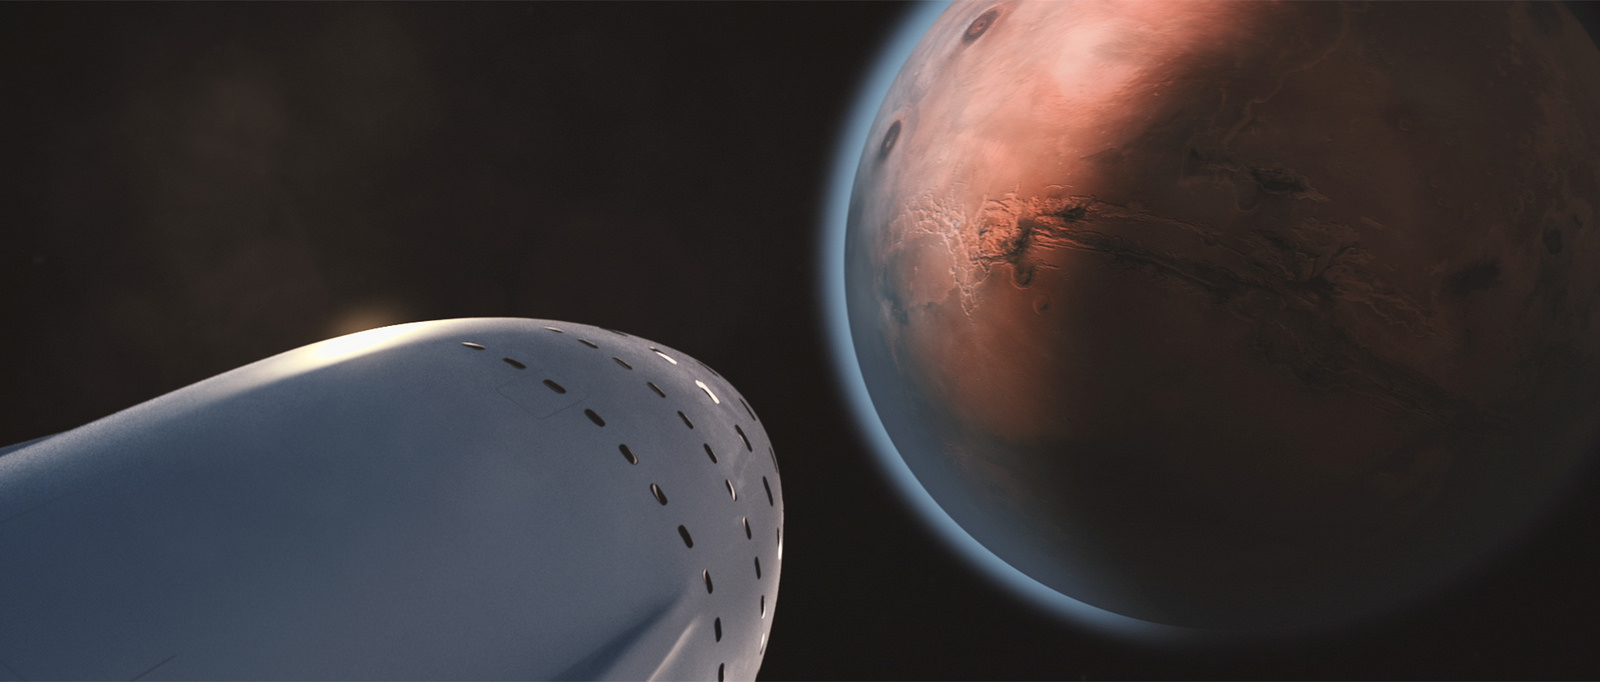 Artist concept of a SpaceX human mission to Mars.